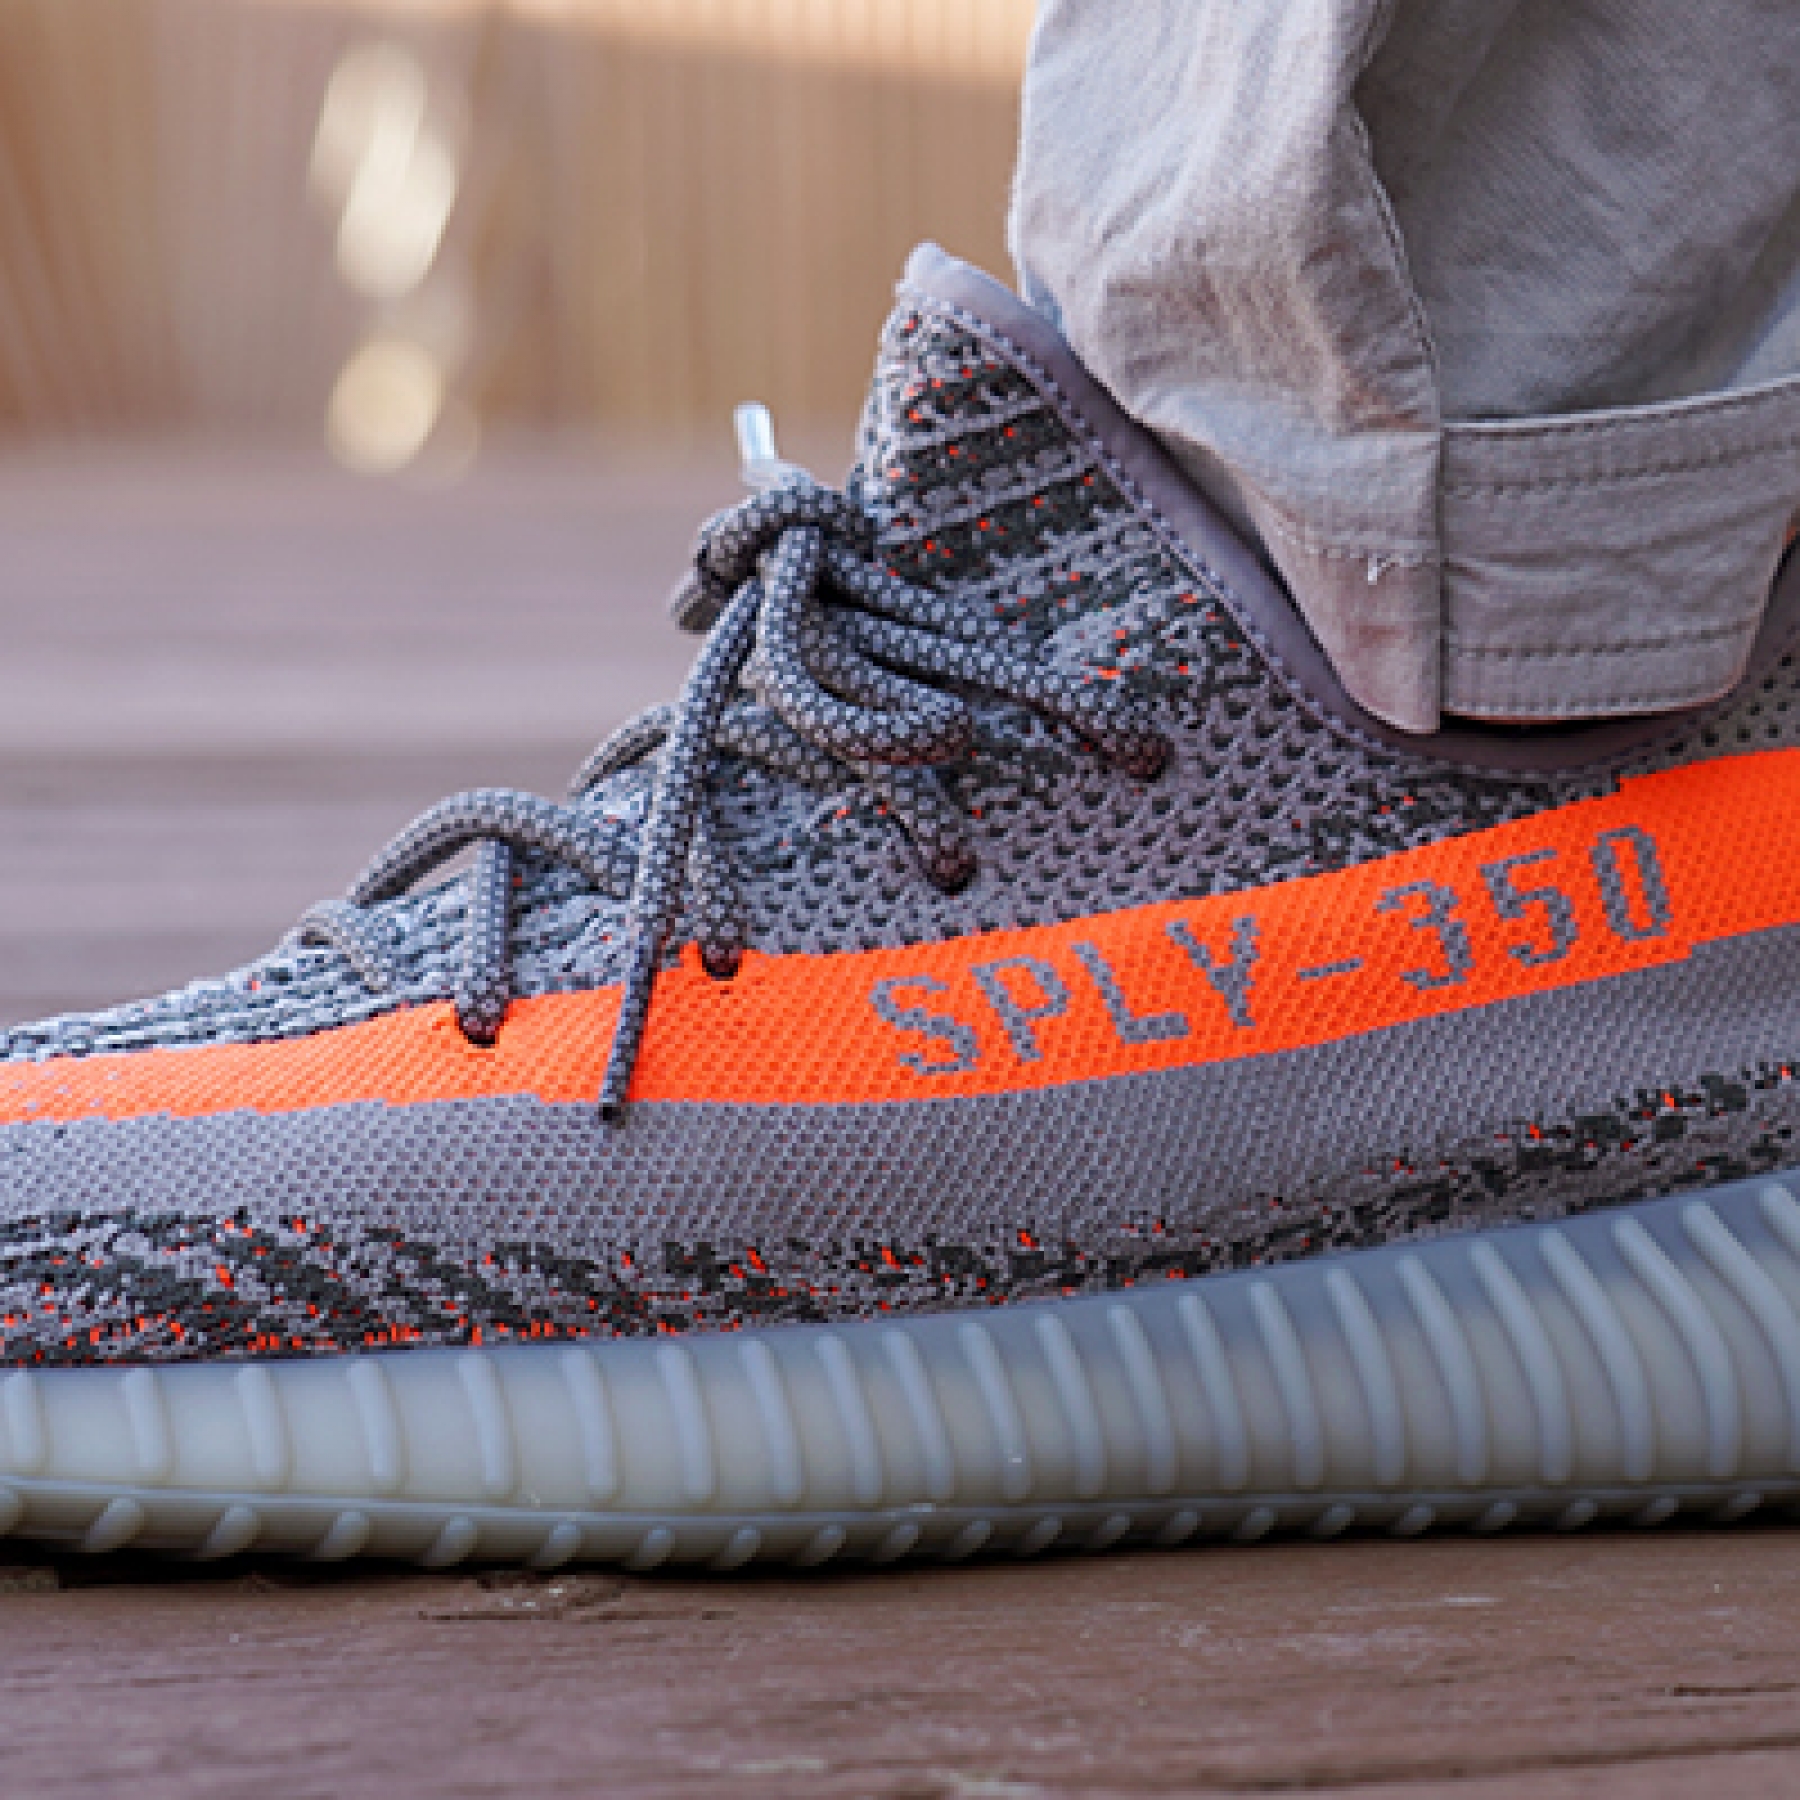 Adidas ended the Yeezy partnership in October 2022